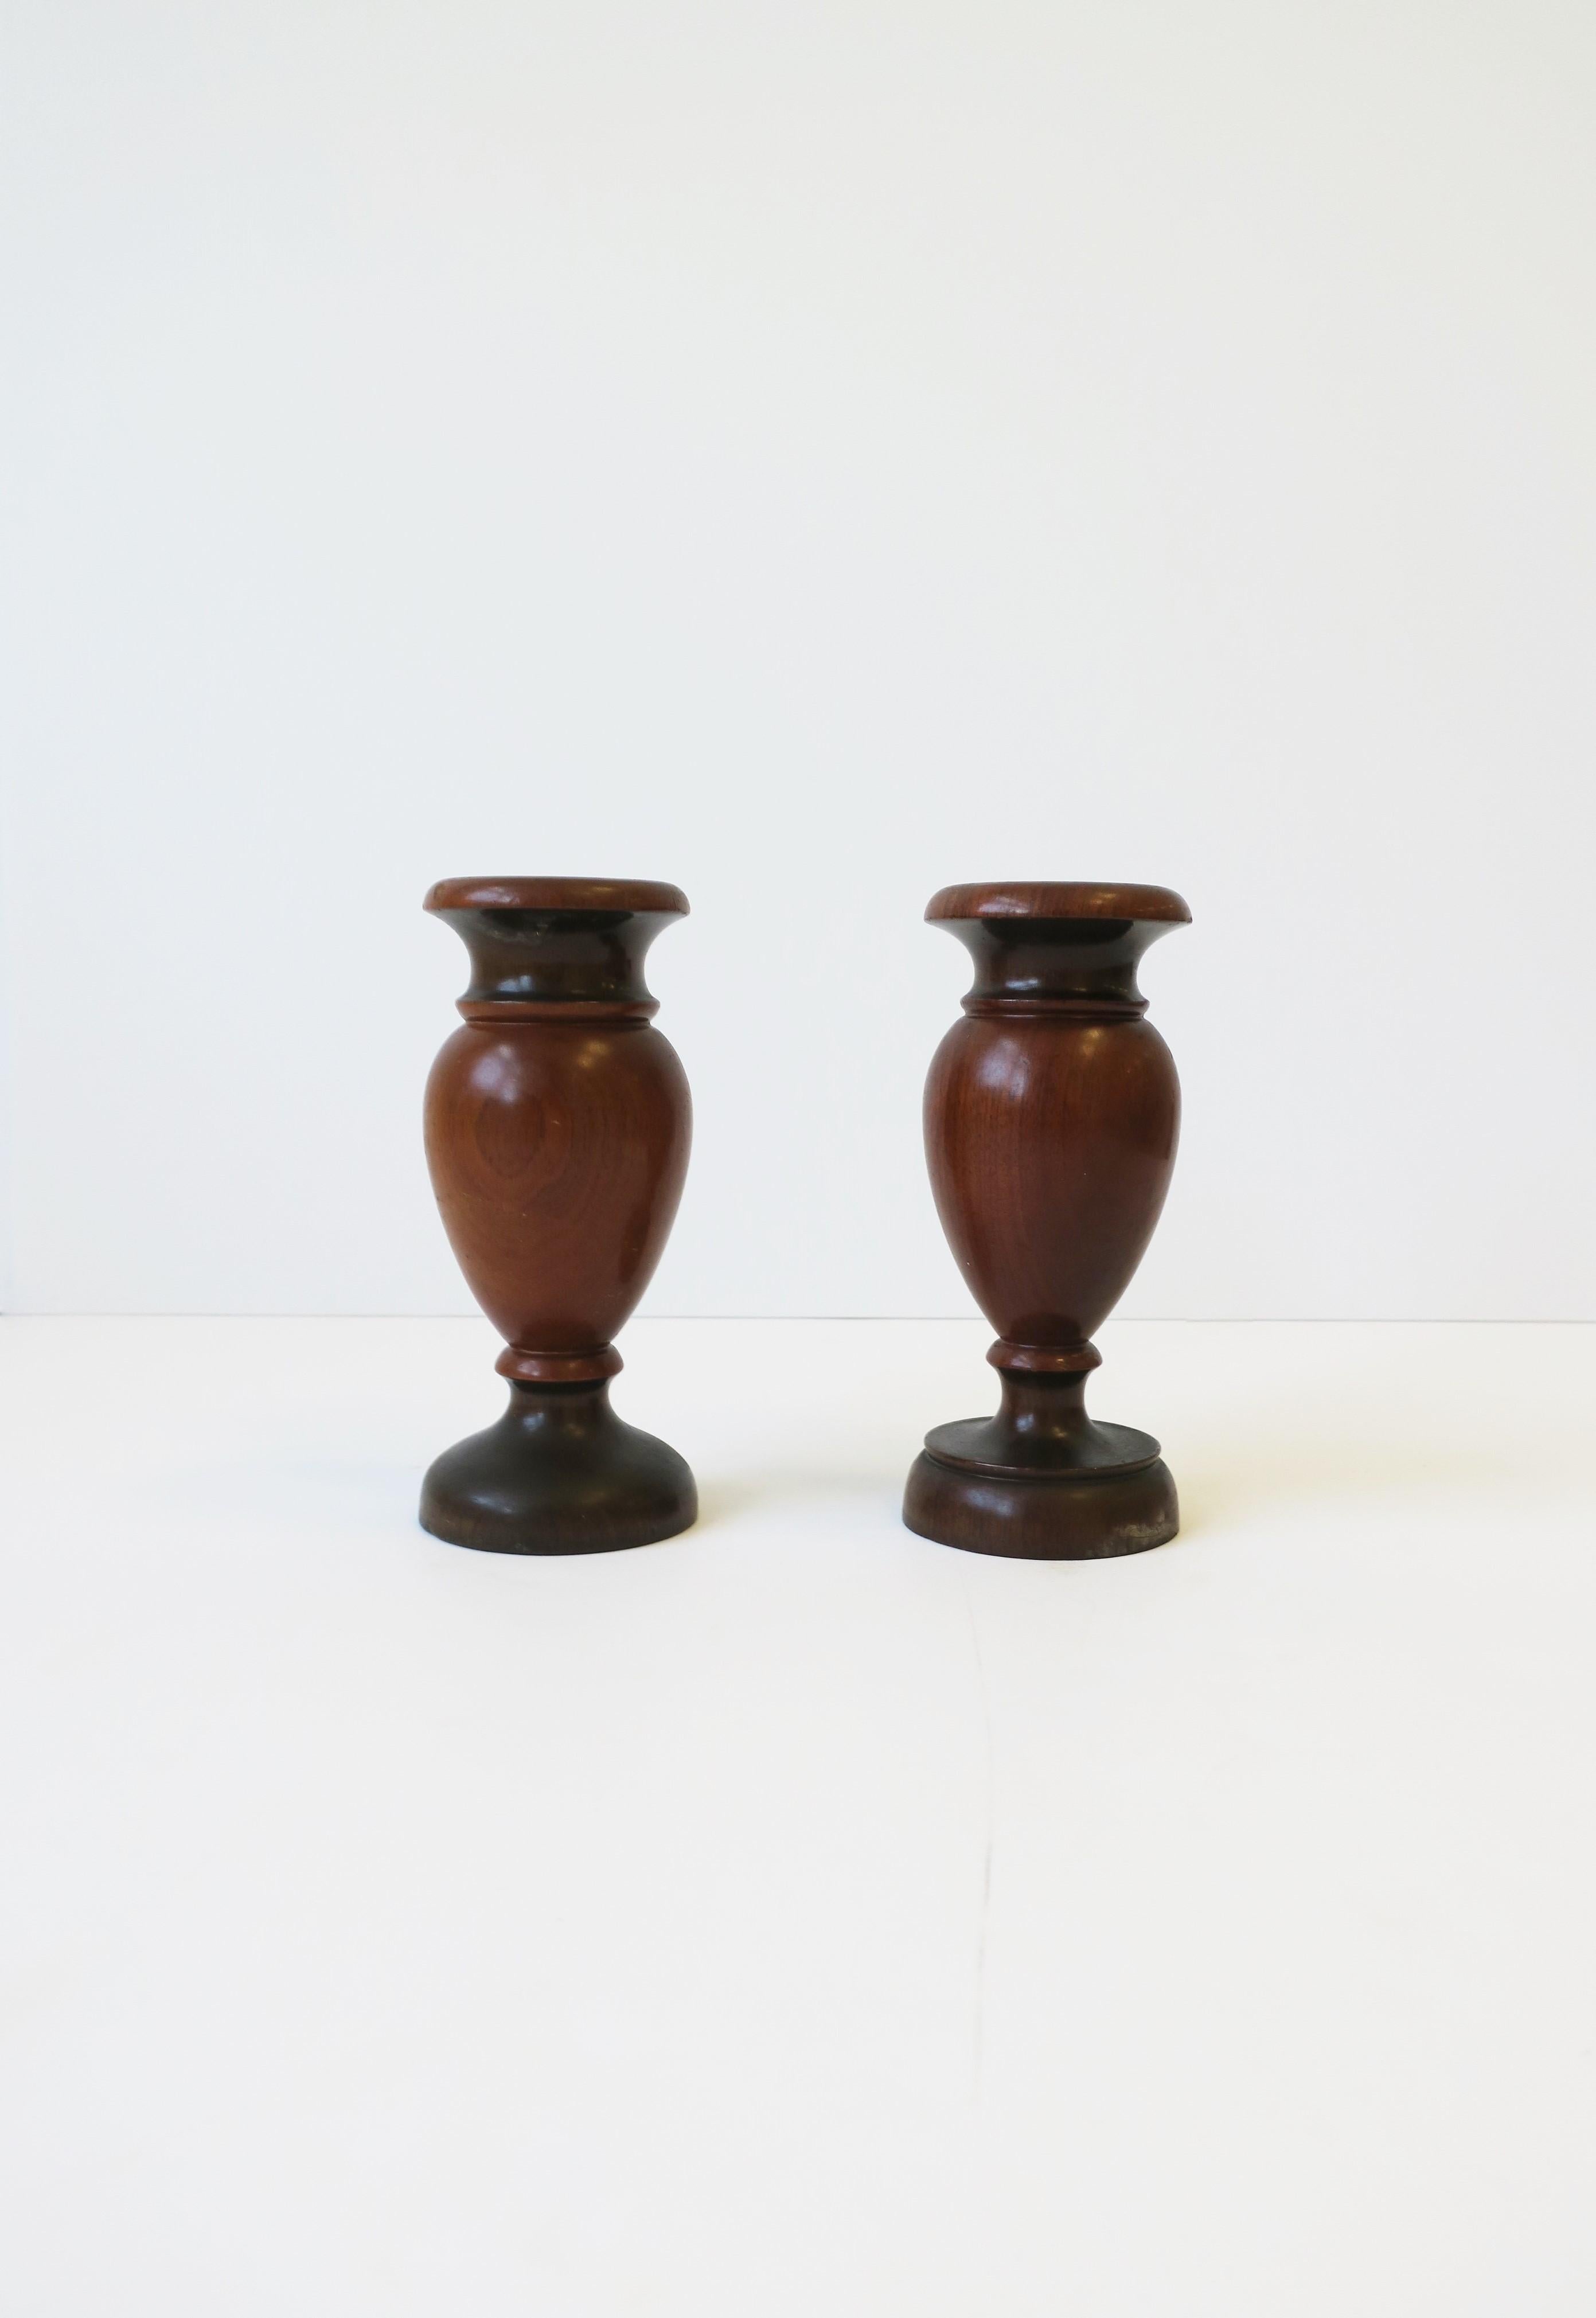 English Turned Walnut Urn Wood Spill Vases, Pair, circa 19th Century For Sale 1